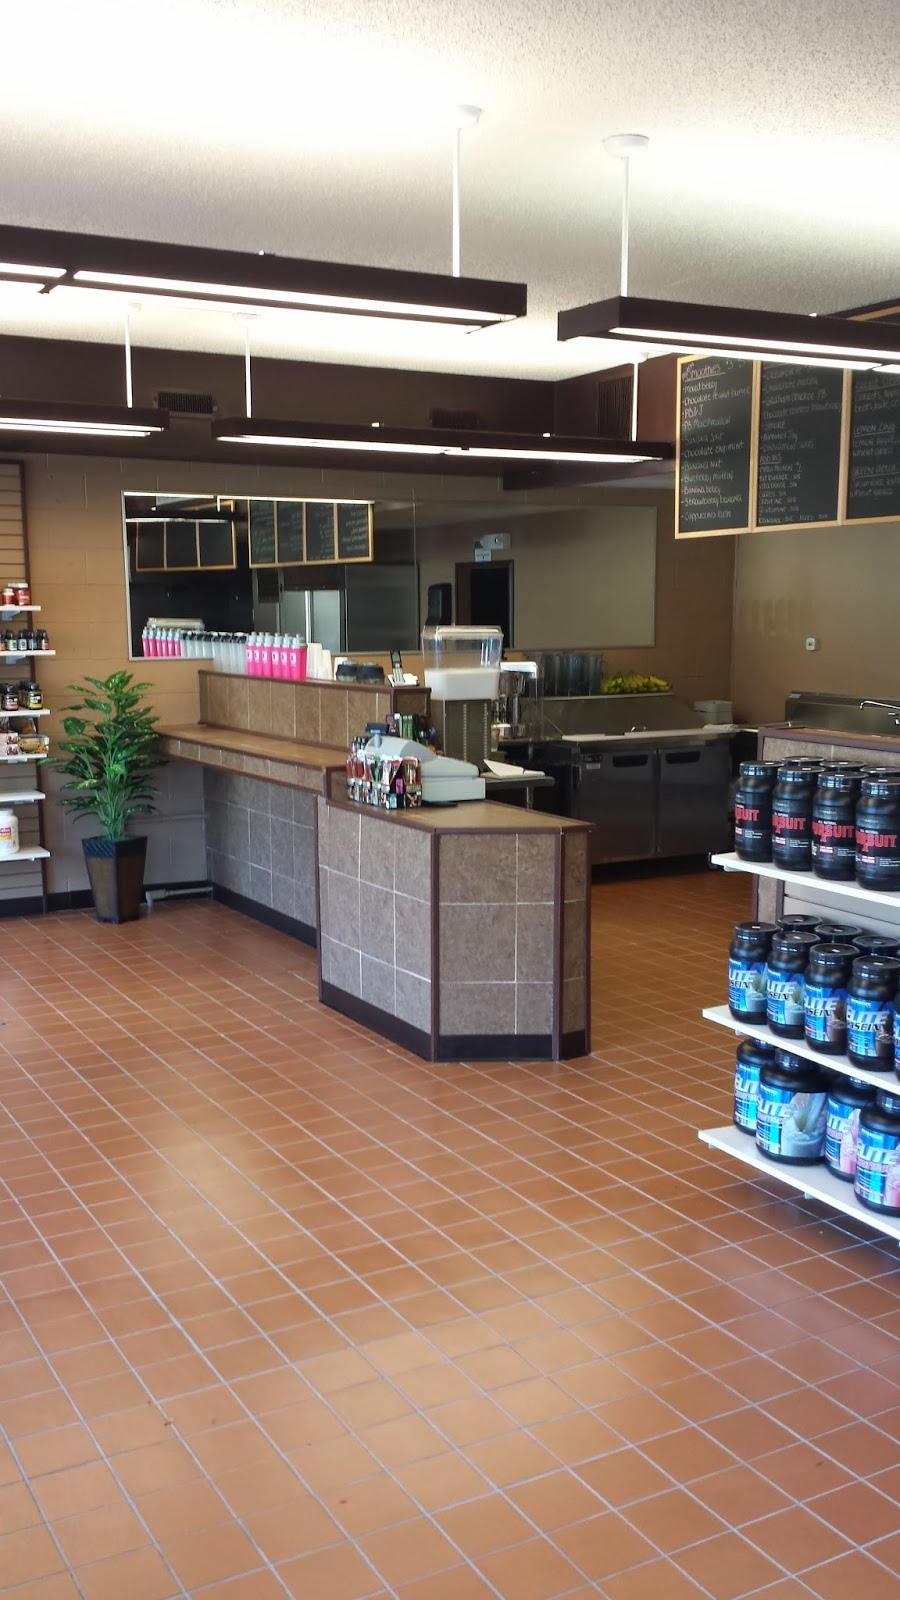 Sparta Nutrition Store (Opened 2013) | 270 S Sparta Ave, Sparta Township, NJ 07871 | Phone: (973) 726-3484